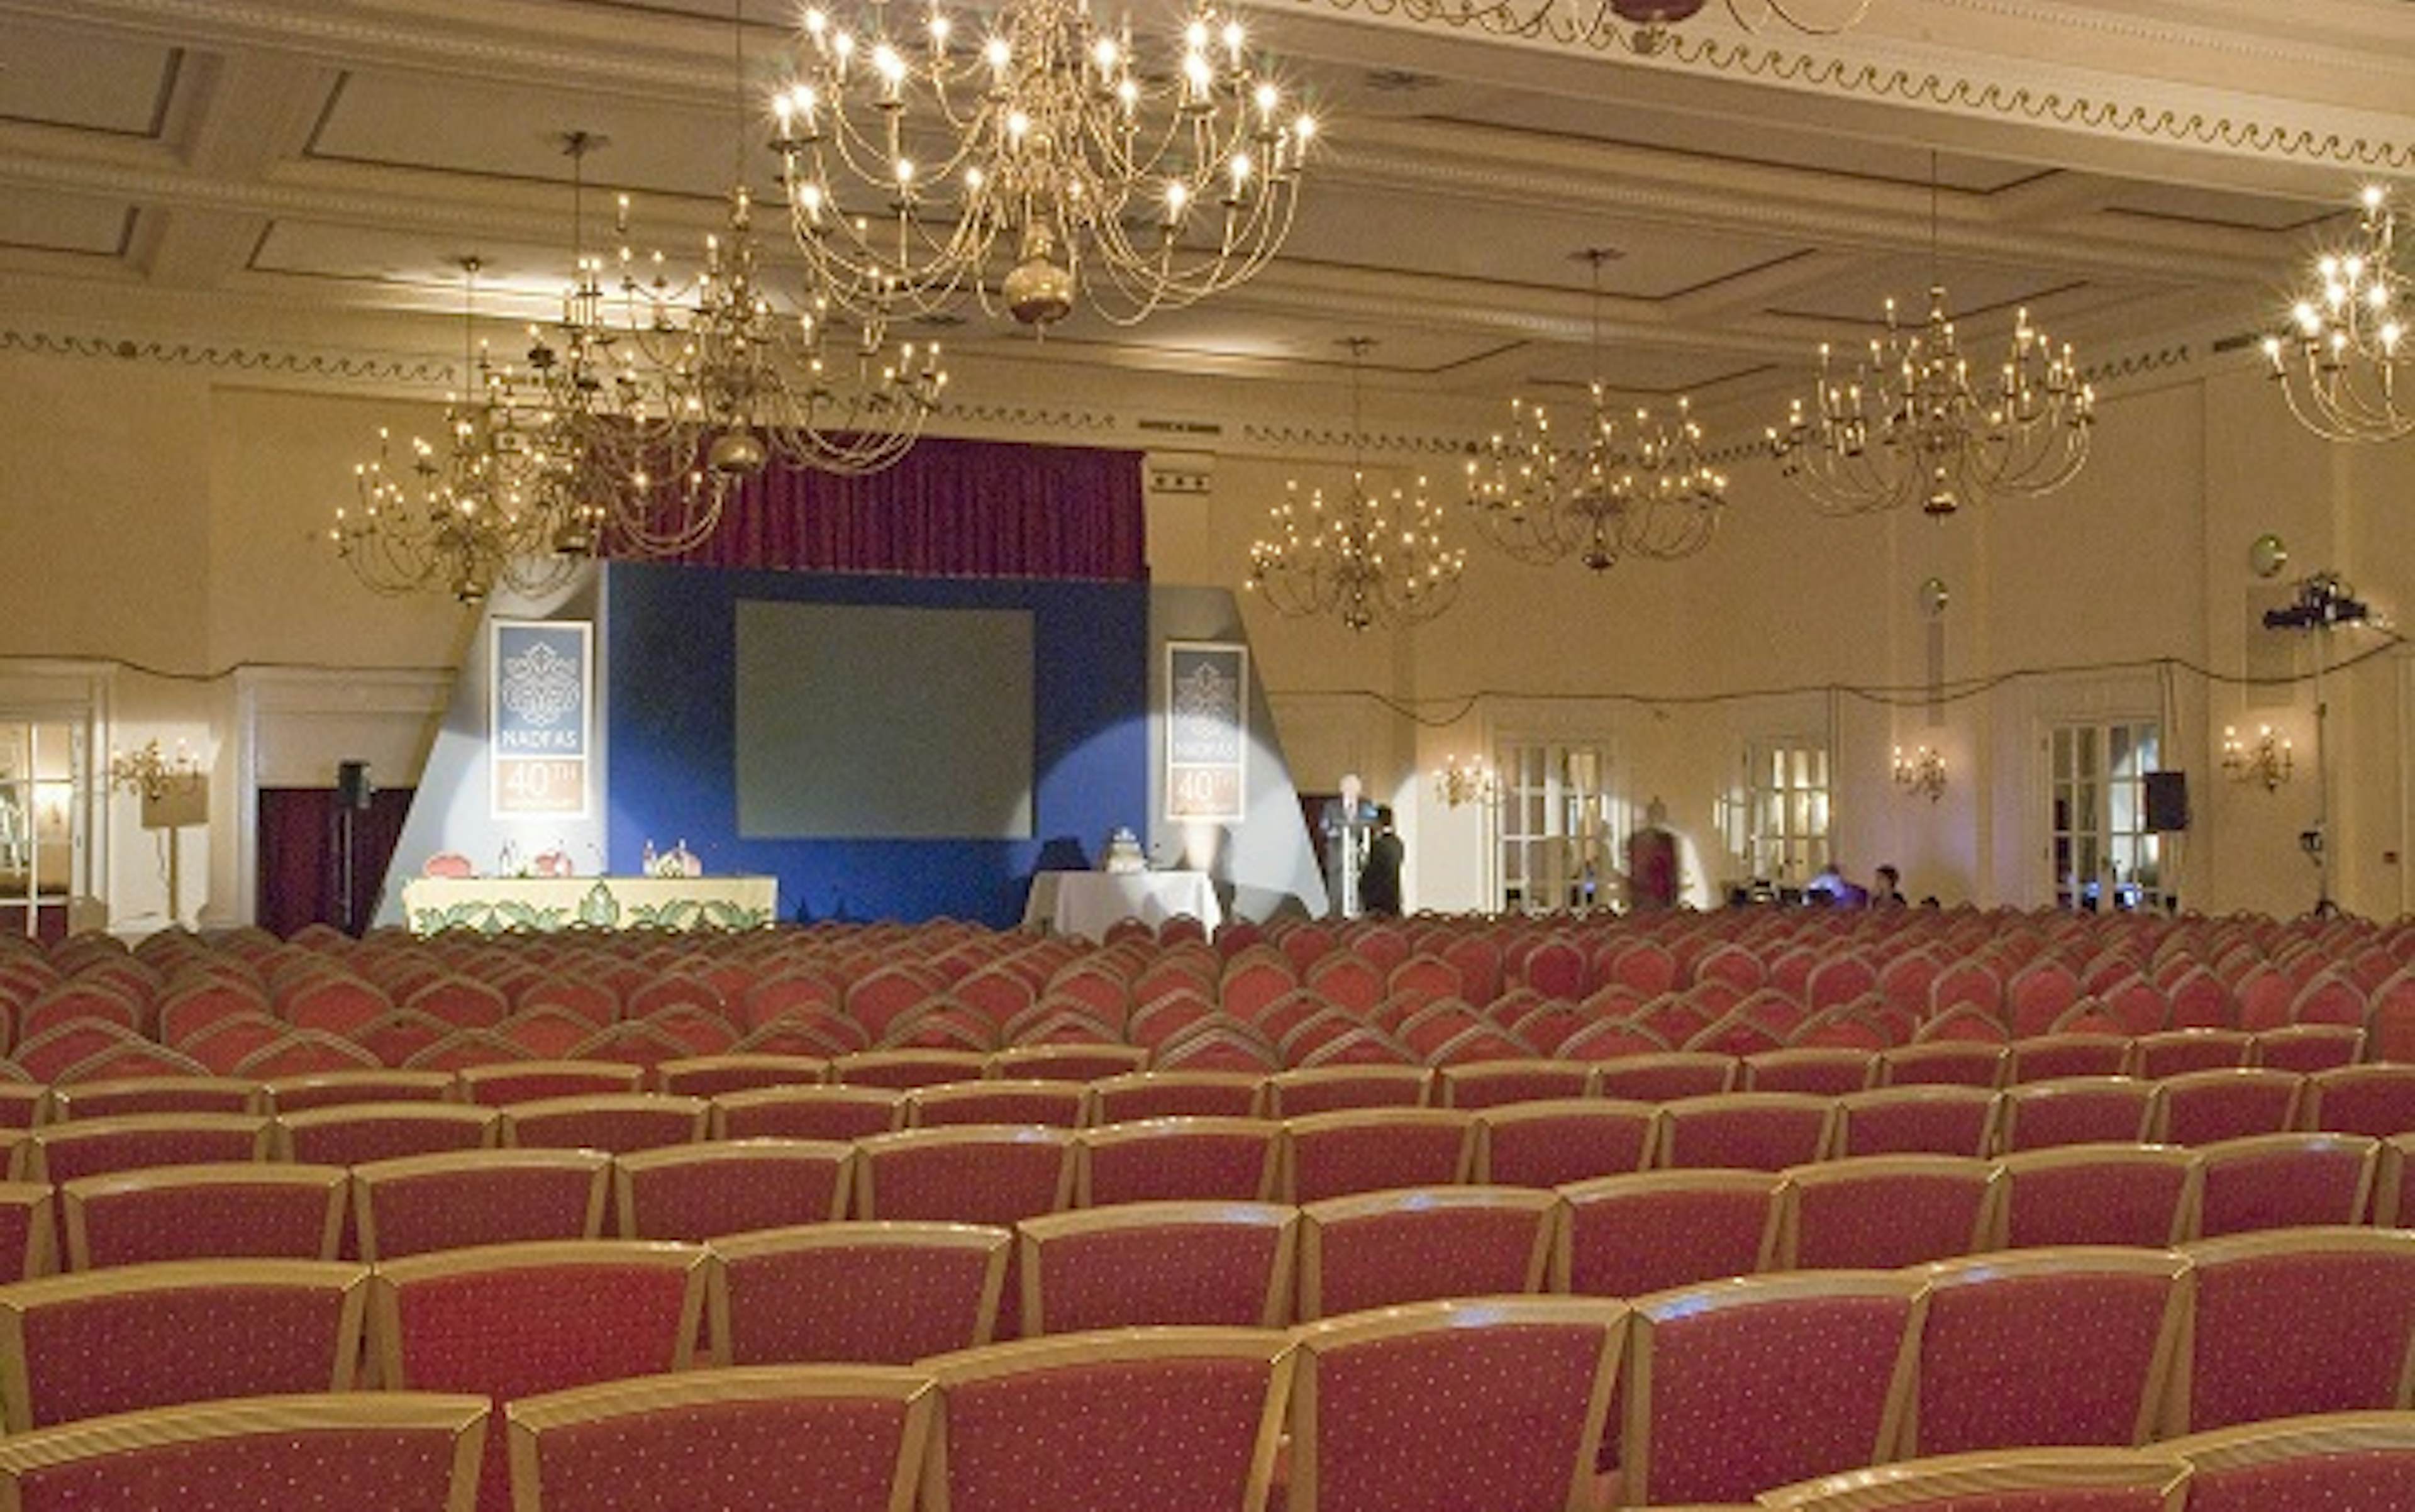 The Adelphi Hotel - Banqueting Hall image 1